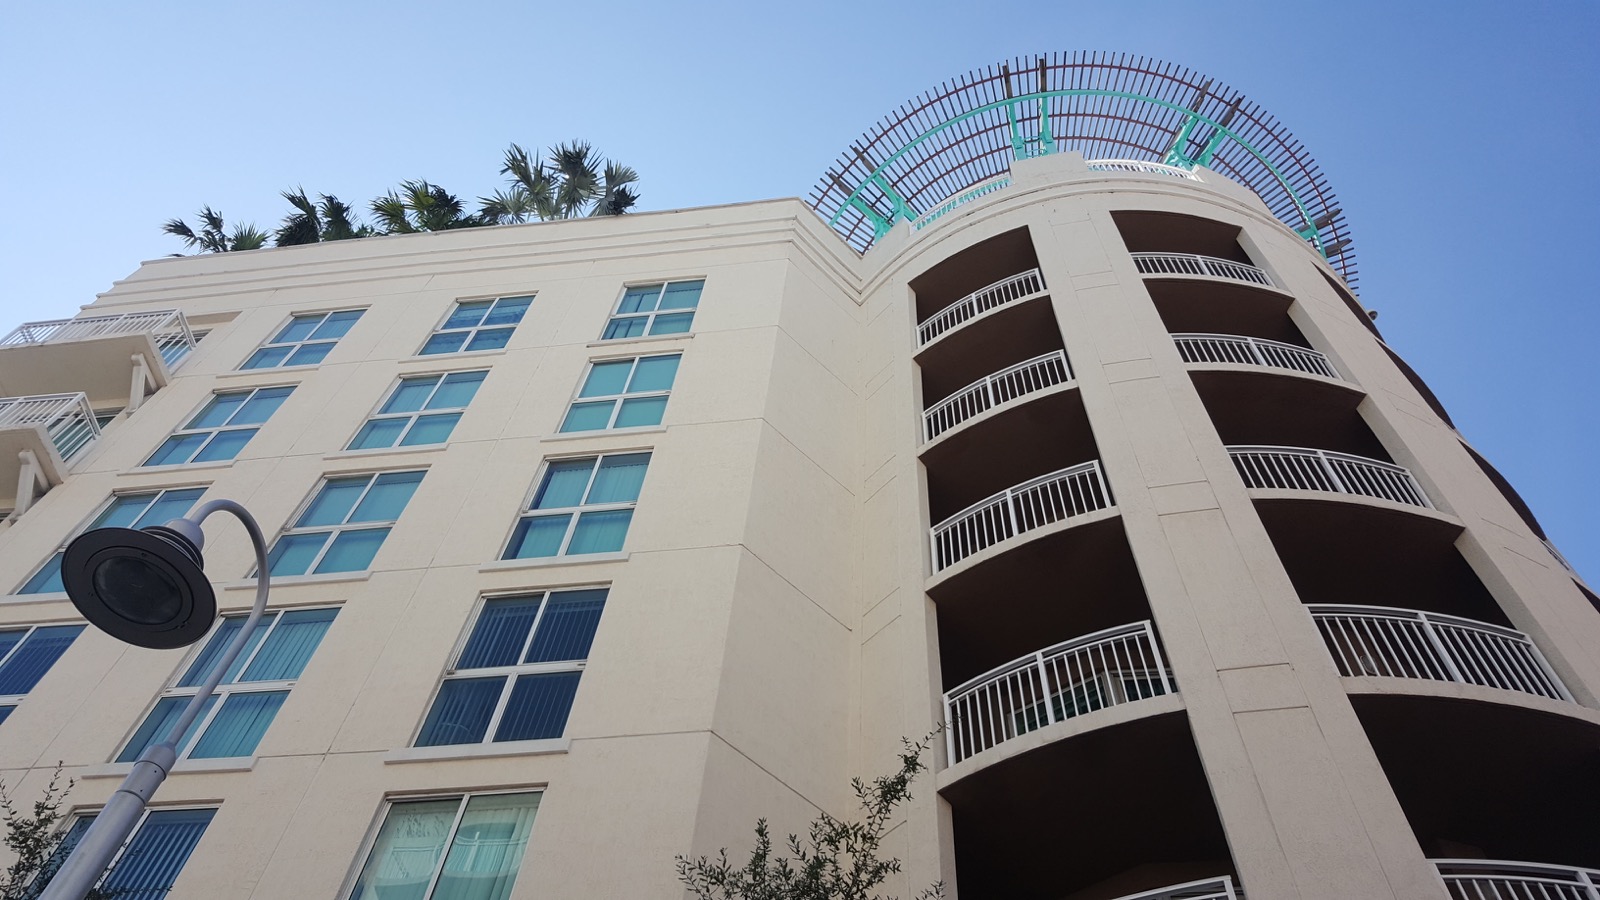 Dowtown Dadeland Apartments Building-G